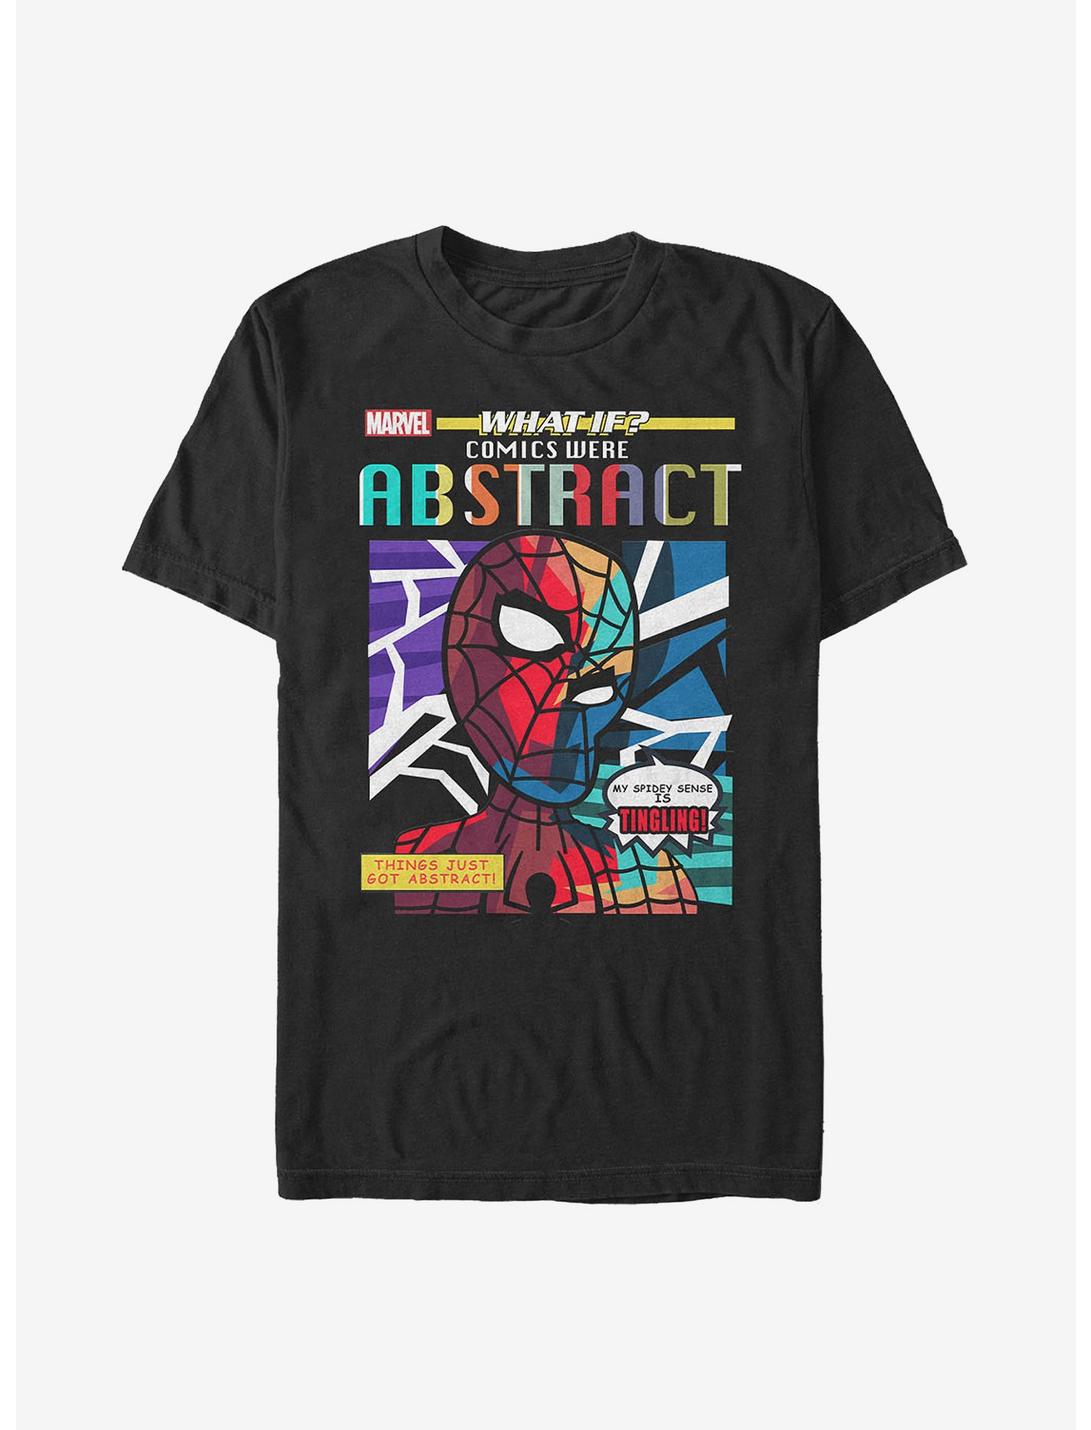 Marvel What If?? Comics Were Abstract Spider-Man T-Shirt, BLACK, hi-res